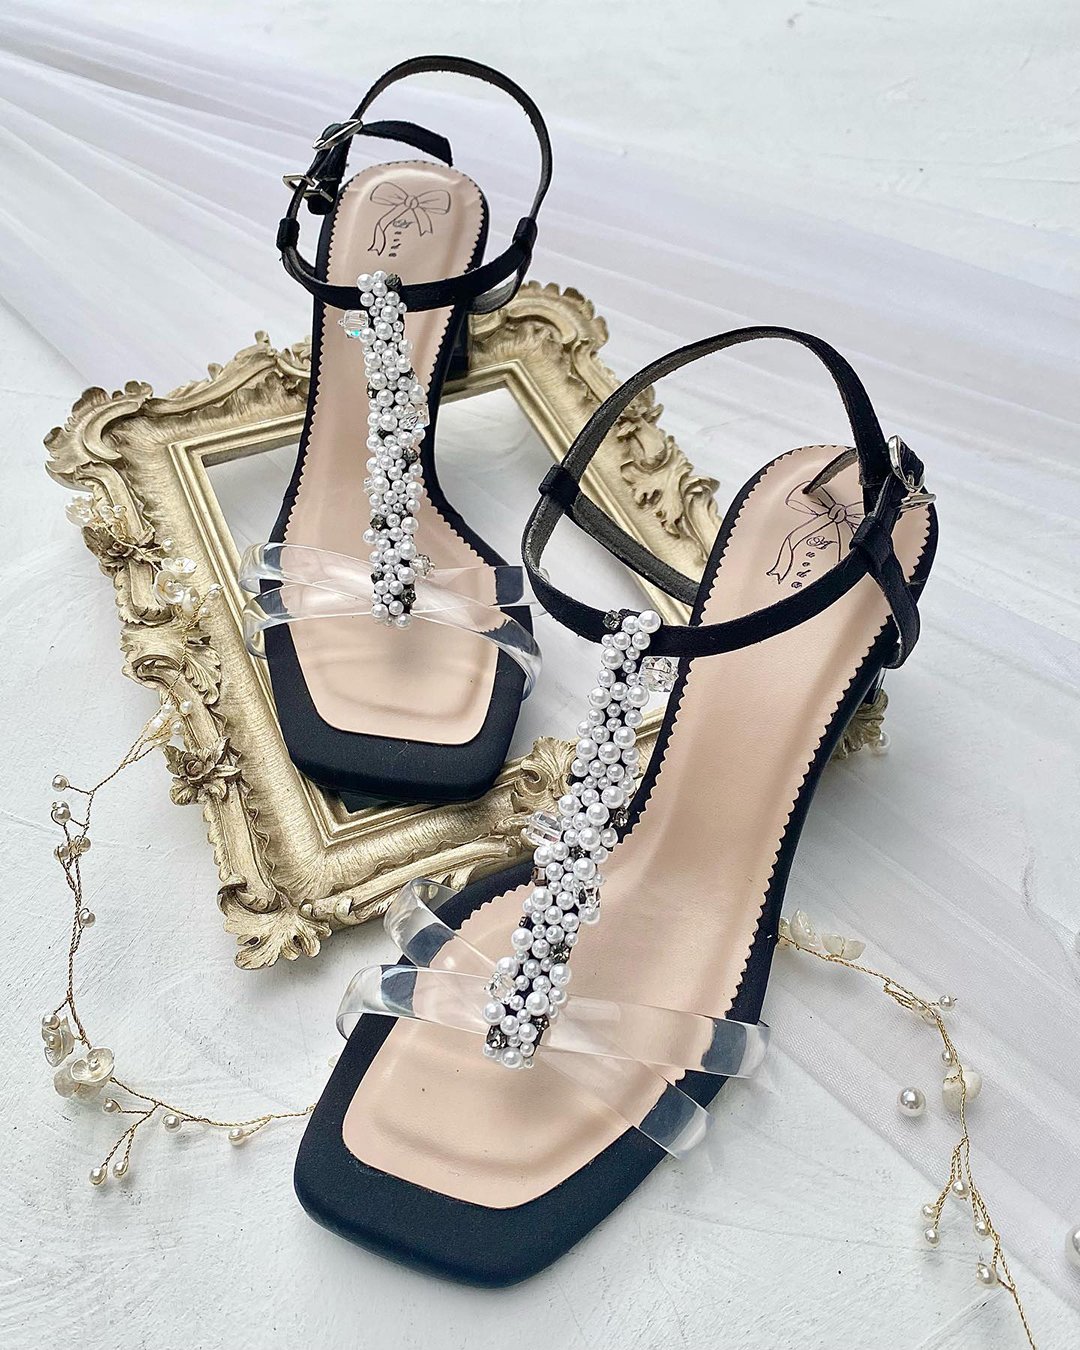 black shoes for wedding with pearls stones comfortable avedafootwear